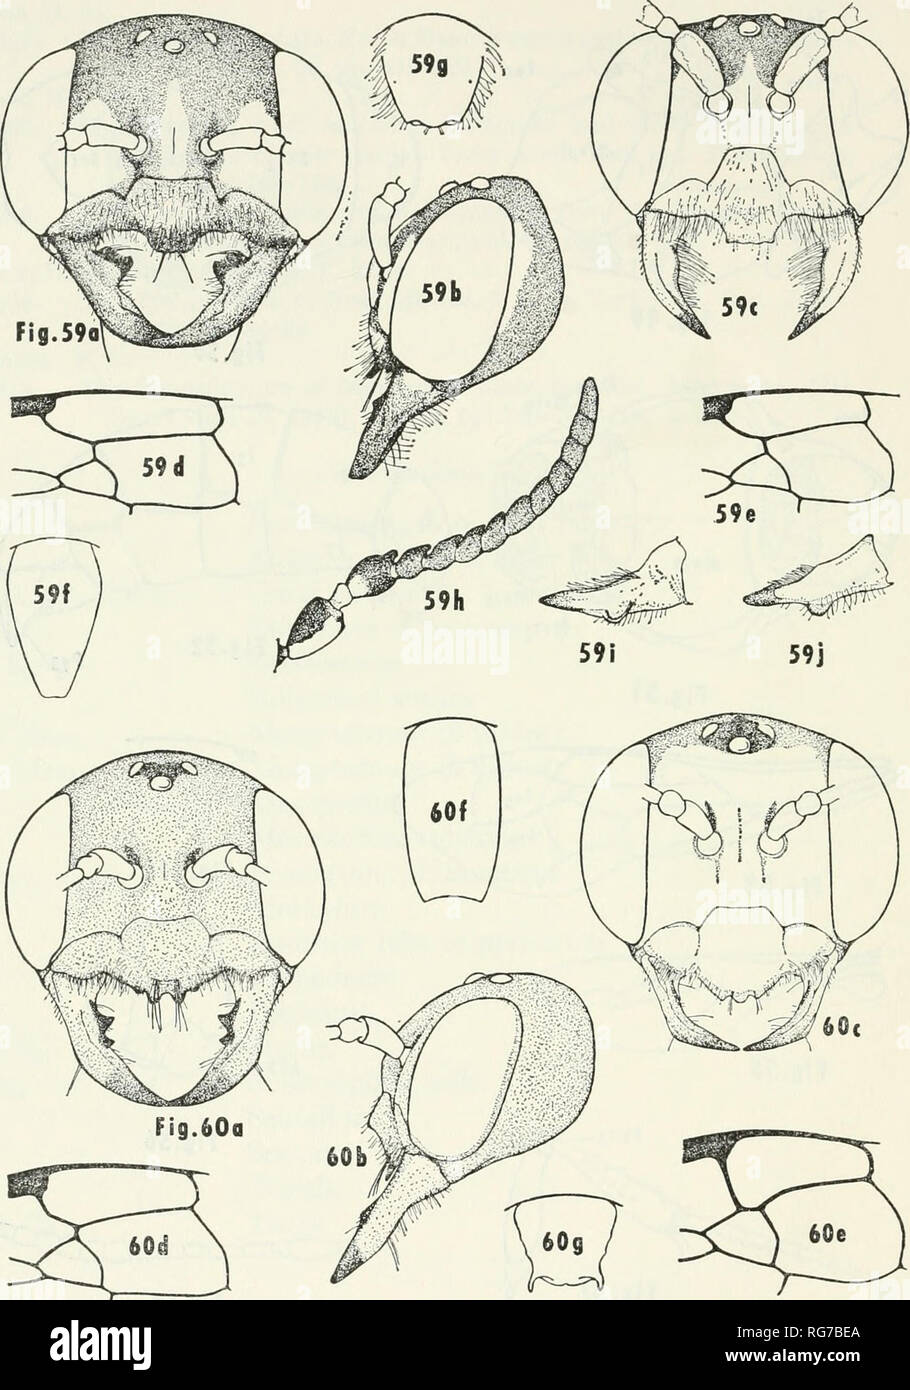 . Bulletin - United States National Museum. Science. 82 U.S. NATIONAL MUSEUM BULLETIN 2 68. Figures 59-60.—59, E. angulata Rohwer (a= female face, b= female head profile, c=male face, d= female wing, e=male wing, f= female pygidium, g=male pygidium, h=male antennae, posterior view, i=male mandible, dorsal, j=male mandible, ventral); 60, E. apicata Banks (a= female face, b= female head profile, c=male face, d= female wing, e=male wing, f= female pygidium, g=male pygidium).. Please note that these images are extracted from scanned page images that may have been digitally enhanced for readability Stock Photo